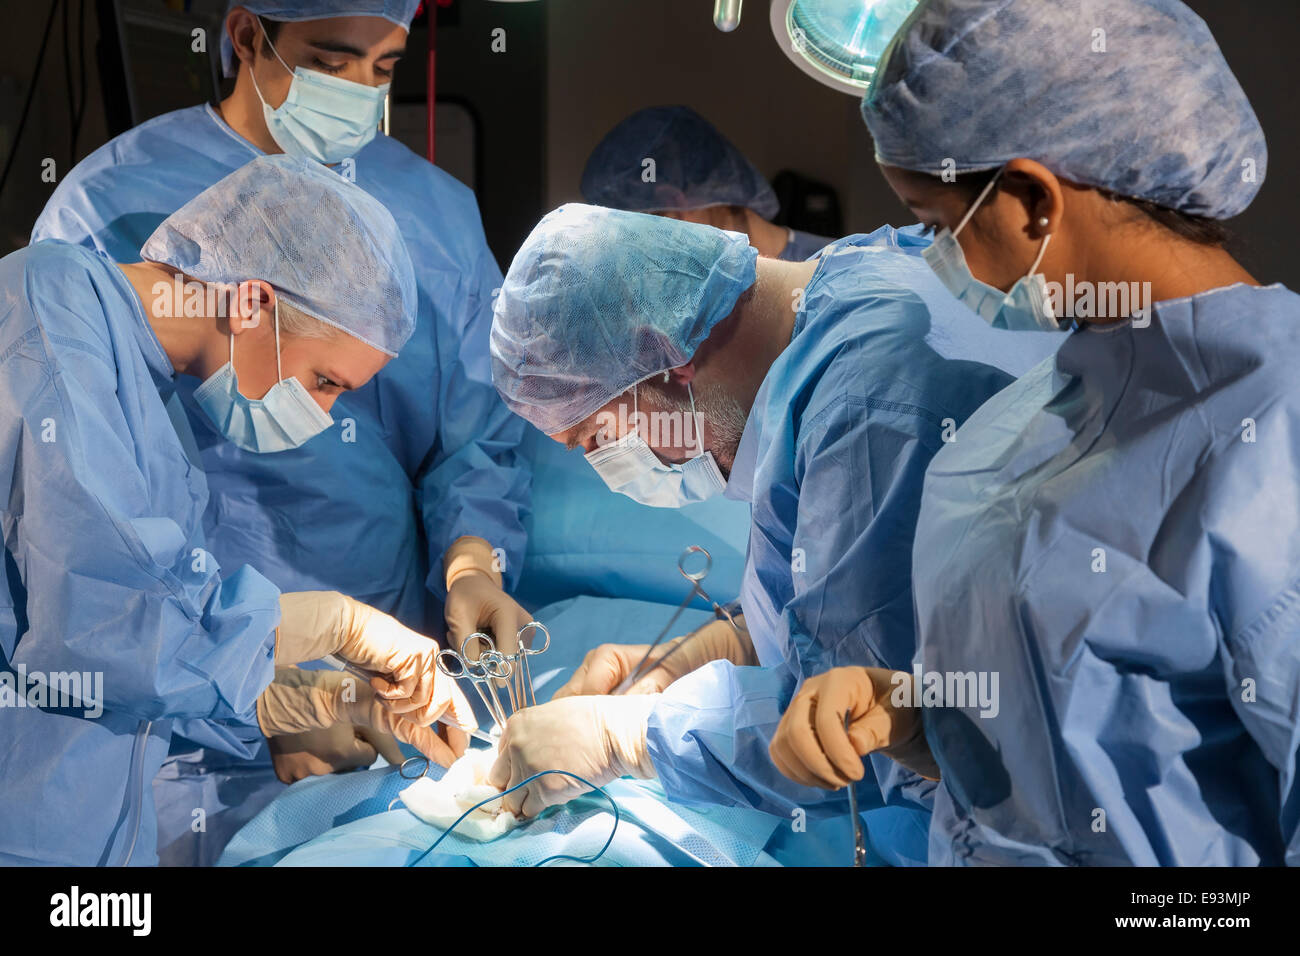 A team of interracial medical doctors male & female surgeons in surgery operating on a patient using different medical equipment Stock Photo